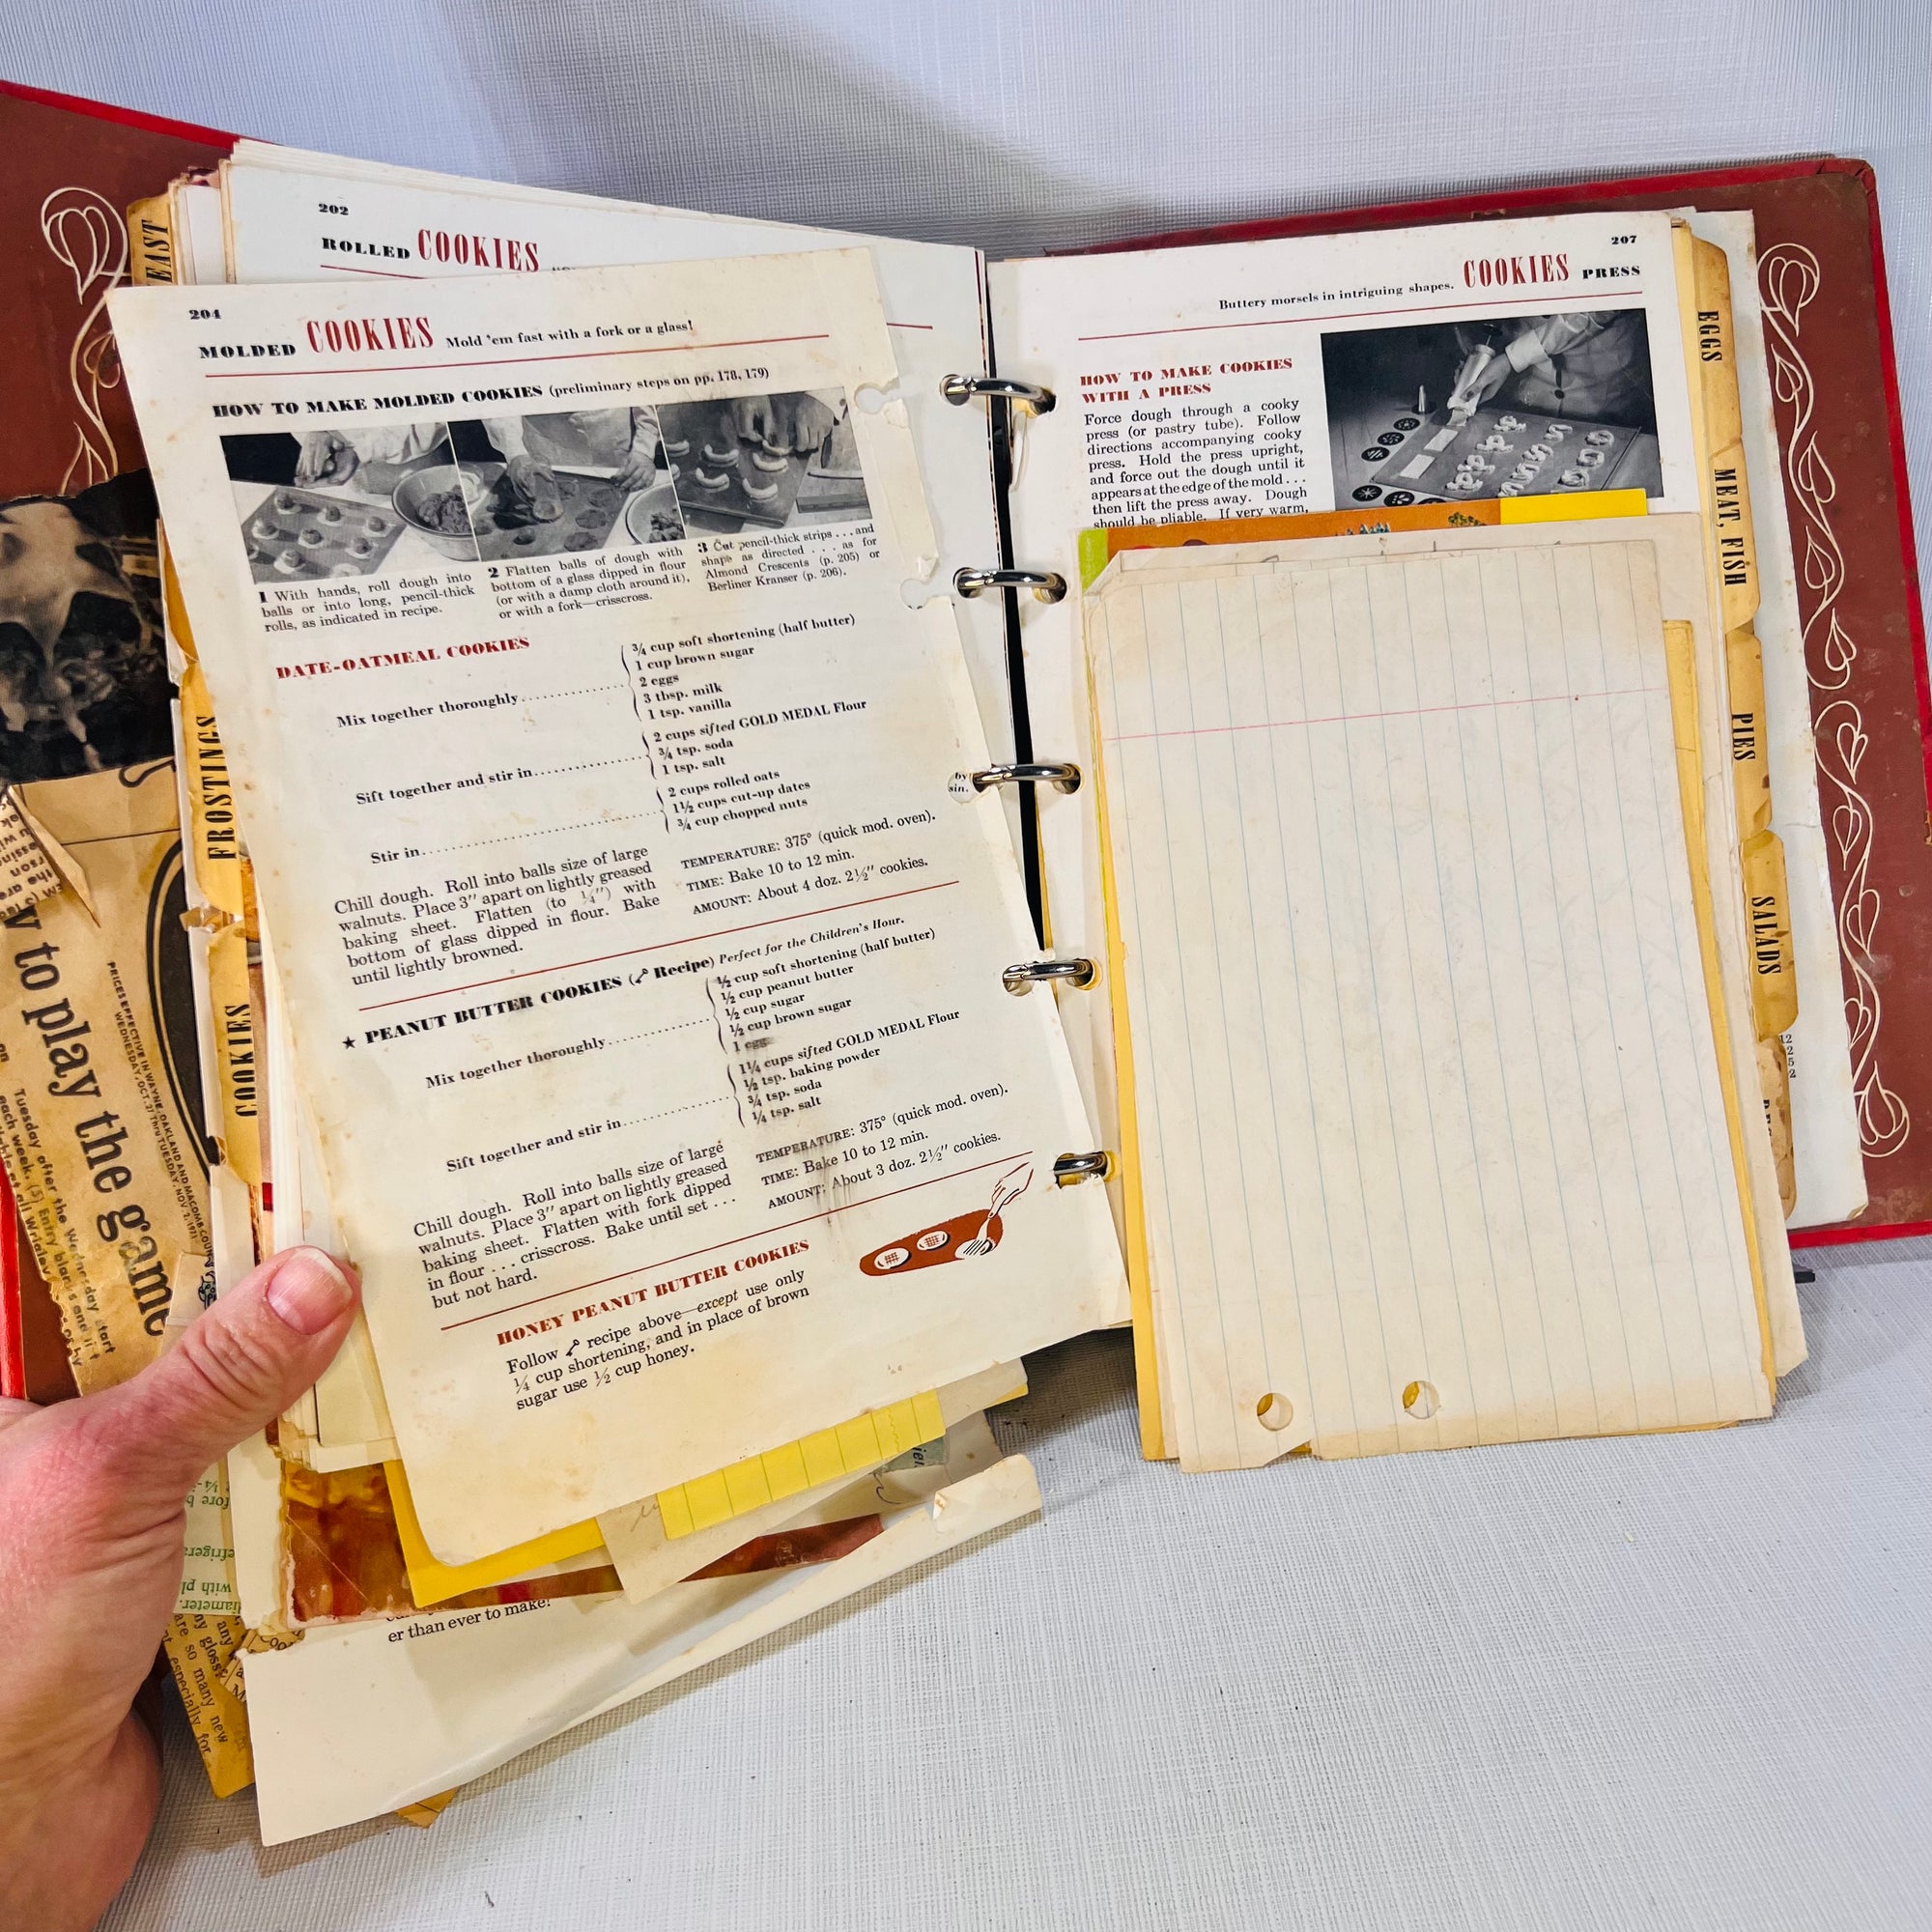 Betty Crocker's Picture Book 5 Ring Binder 1950's McGraw-Hill Book Company Not Complete But Full of Handwritten, Newspaper Recipes